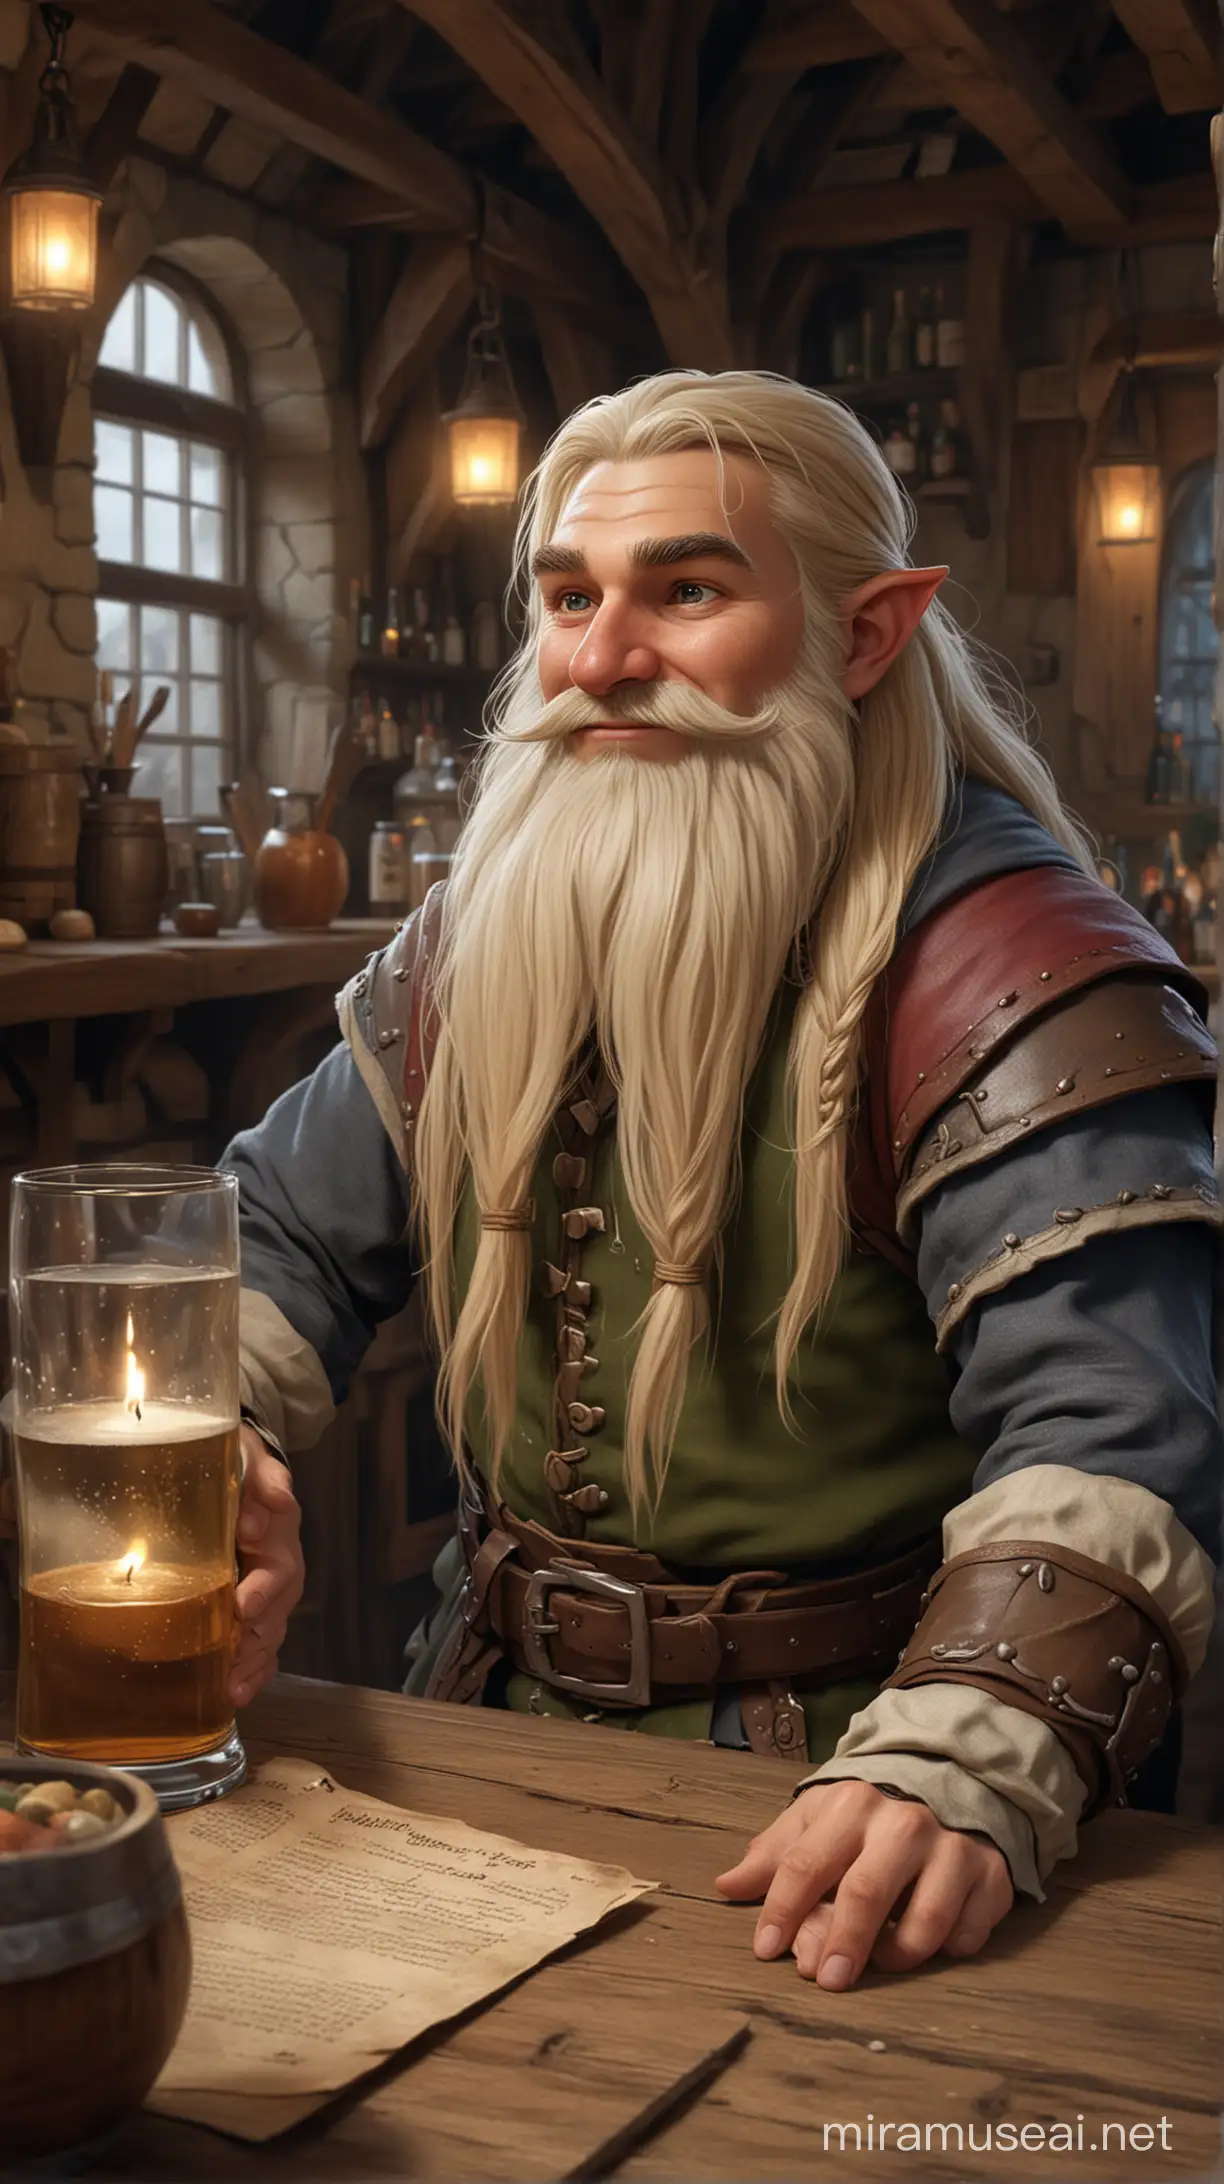 DnD ambient character.
Male gnome with long blonde hair, is a tavern writes. Seems friendly.
The image is inside a tavern with a playful and party atmosphere.